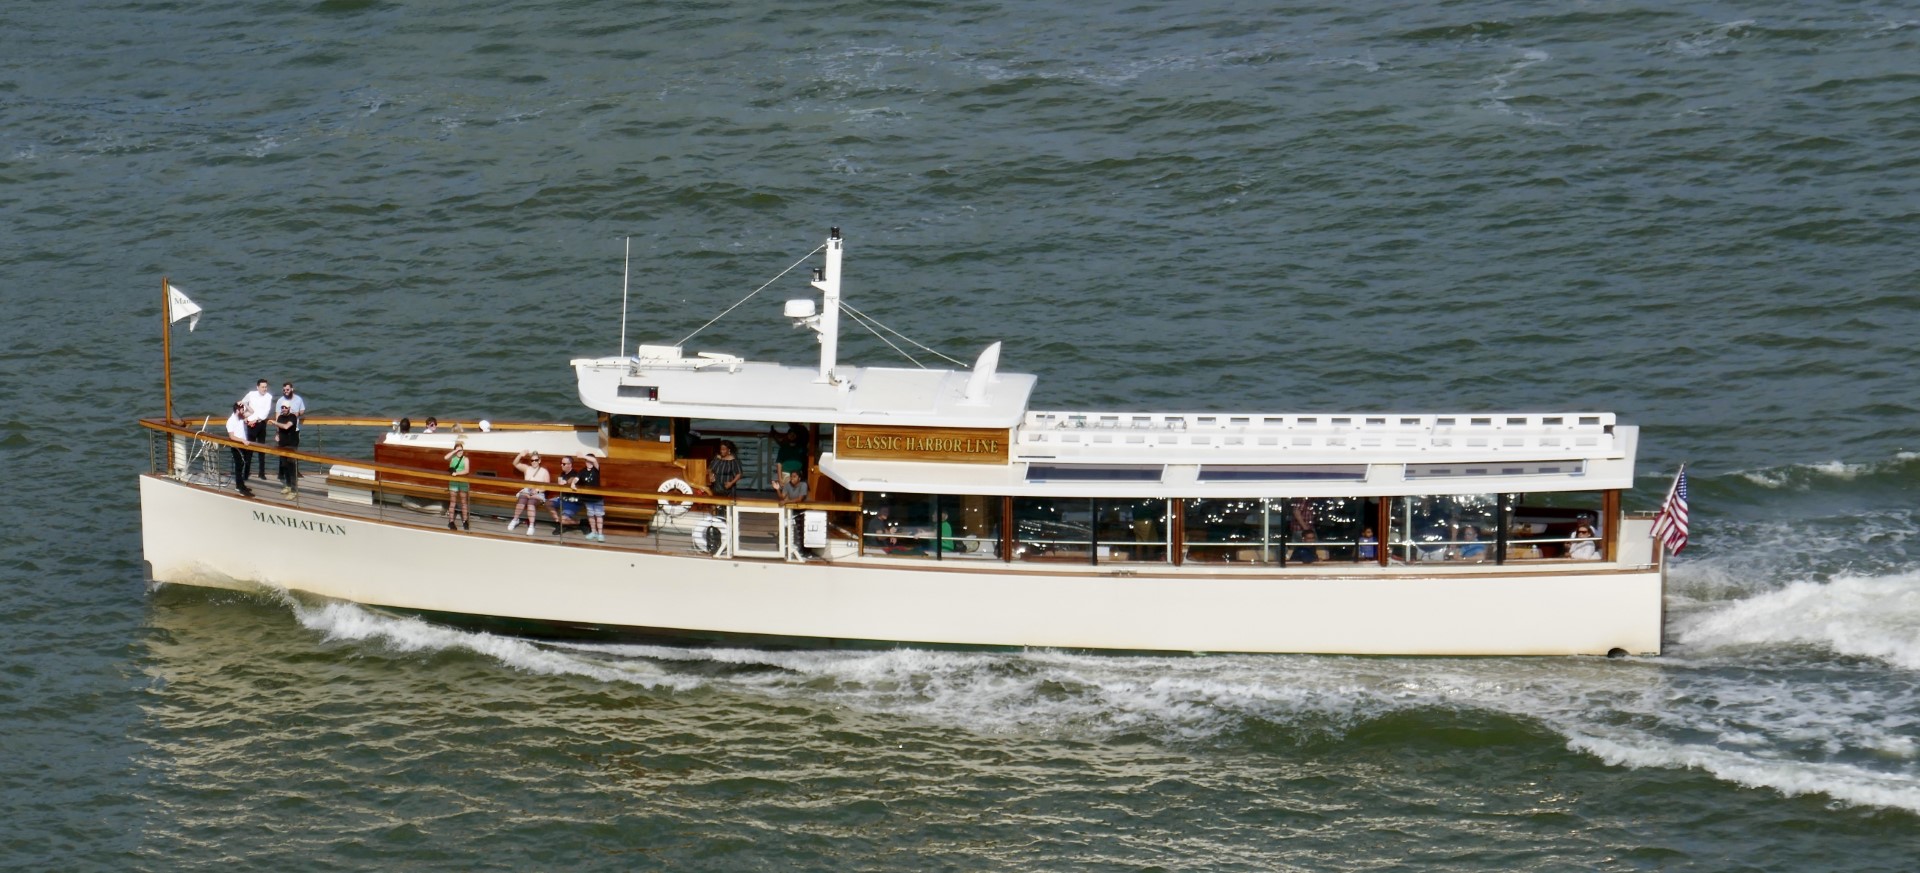 Full boat photo of the classic Yacht Manhattan cruising on an Architecture tour in NY Harbor